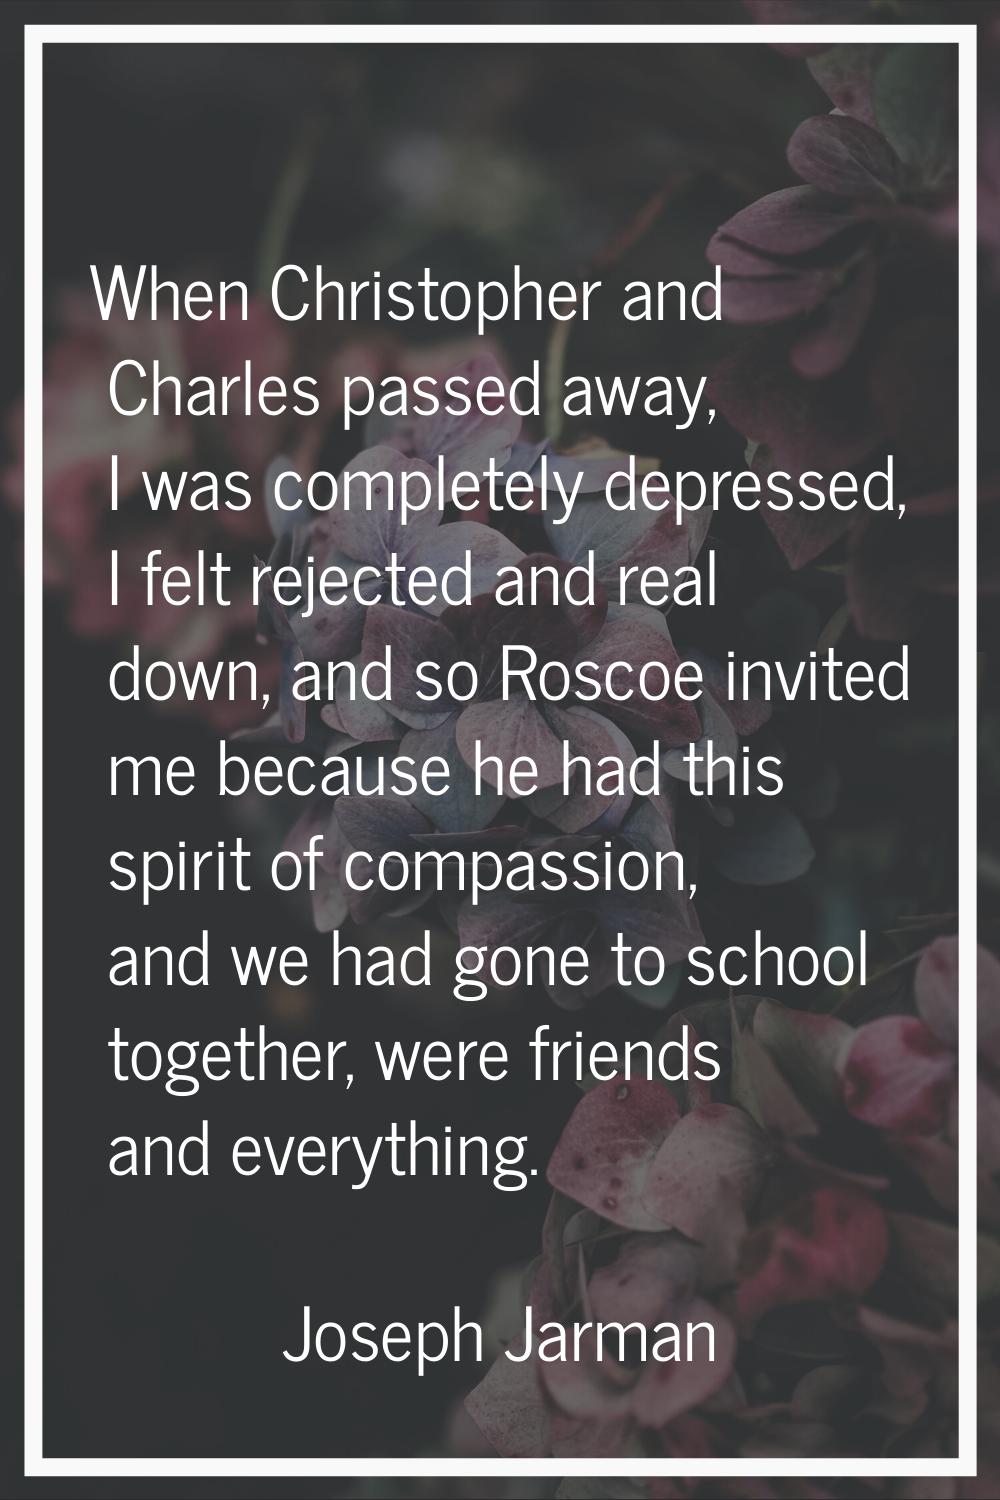 When Christopher and Charles passed away, I was completely depressed, I felt rejected and real down